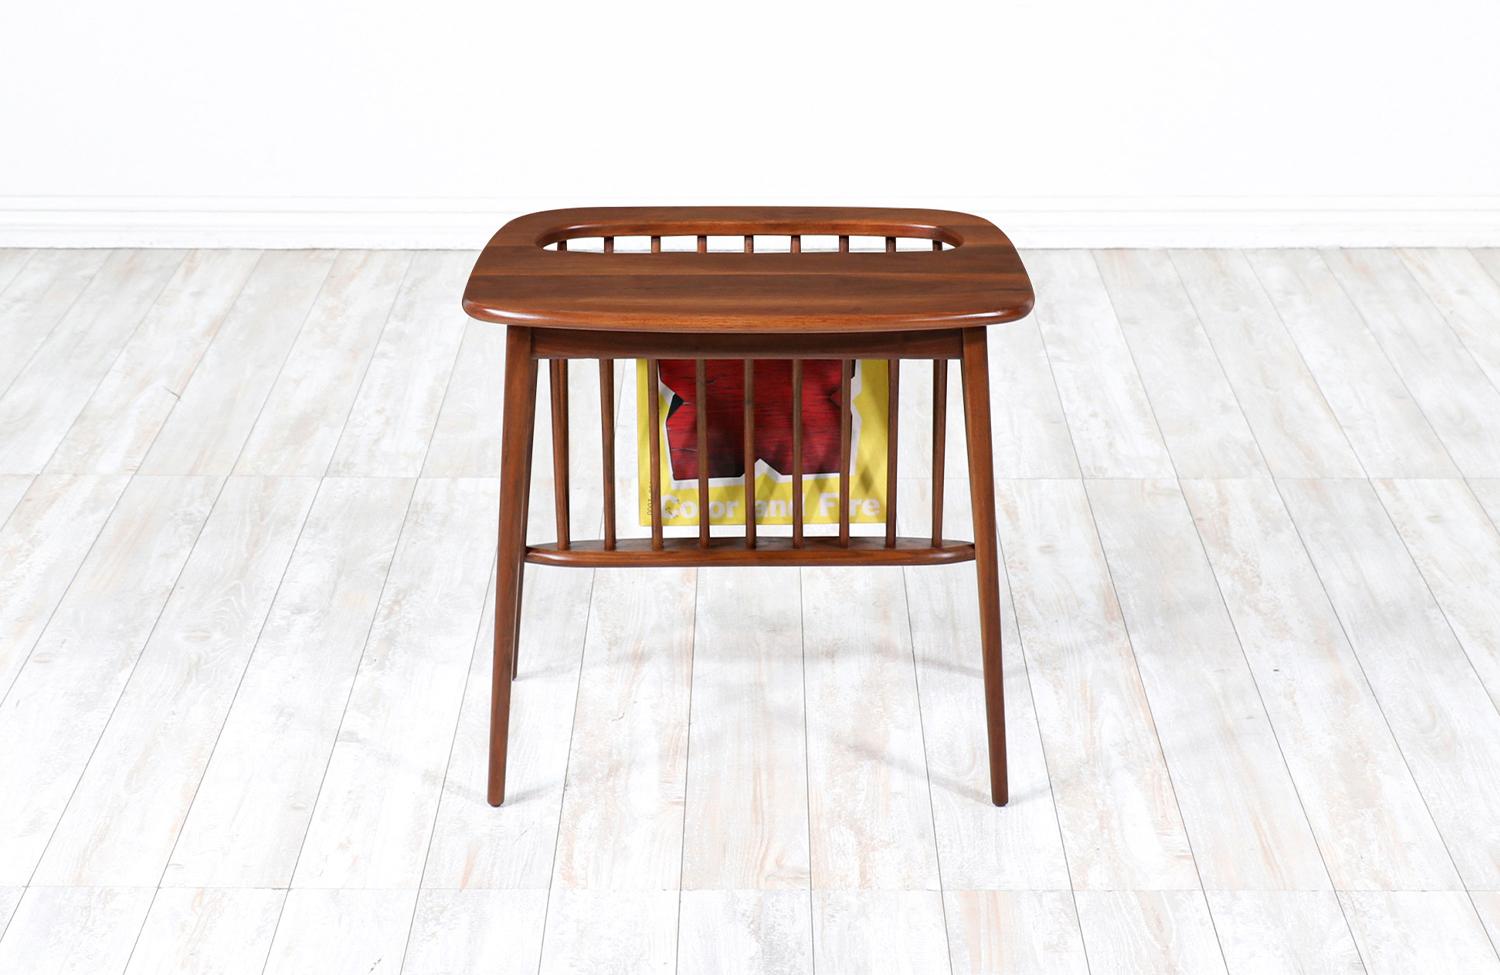 Modern magazine rack designed by Arthur Umanoff for Washington Woodcraft in the United States in 1964. This sleek and versatile side table design features a solid walnut wood structure with a slim magazine holder to conveniently store your reading